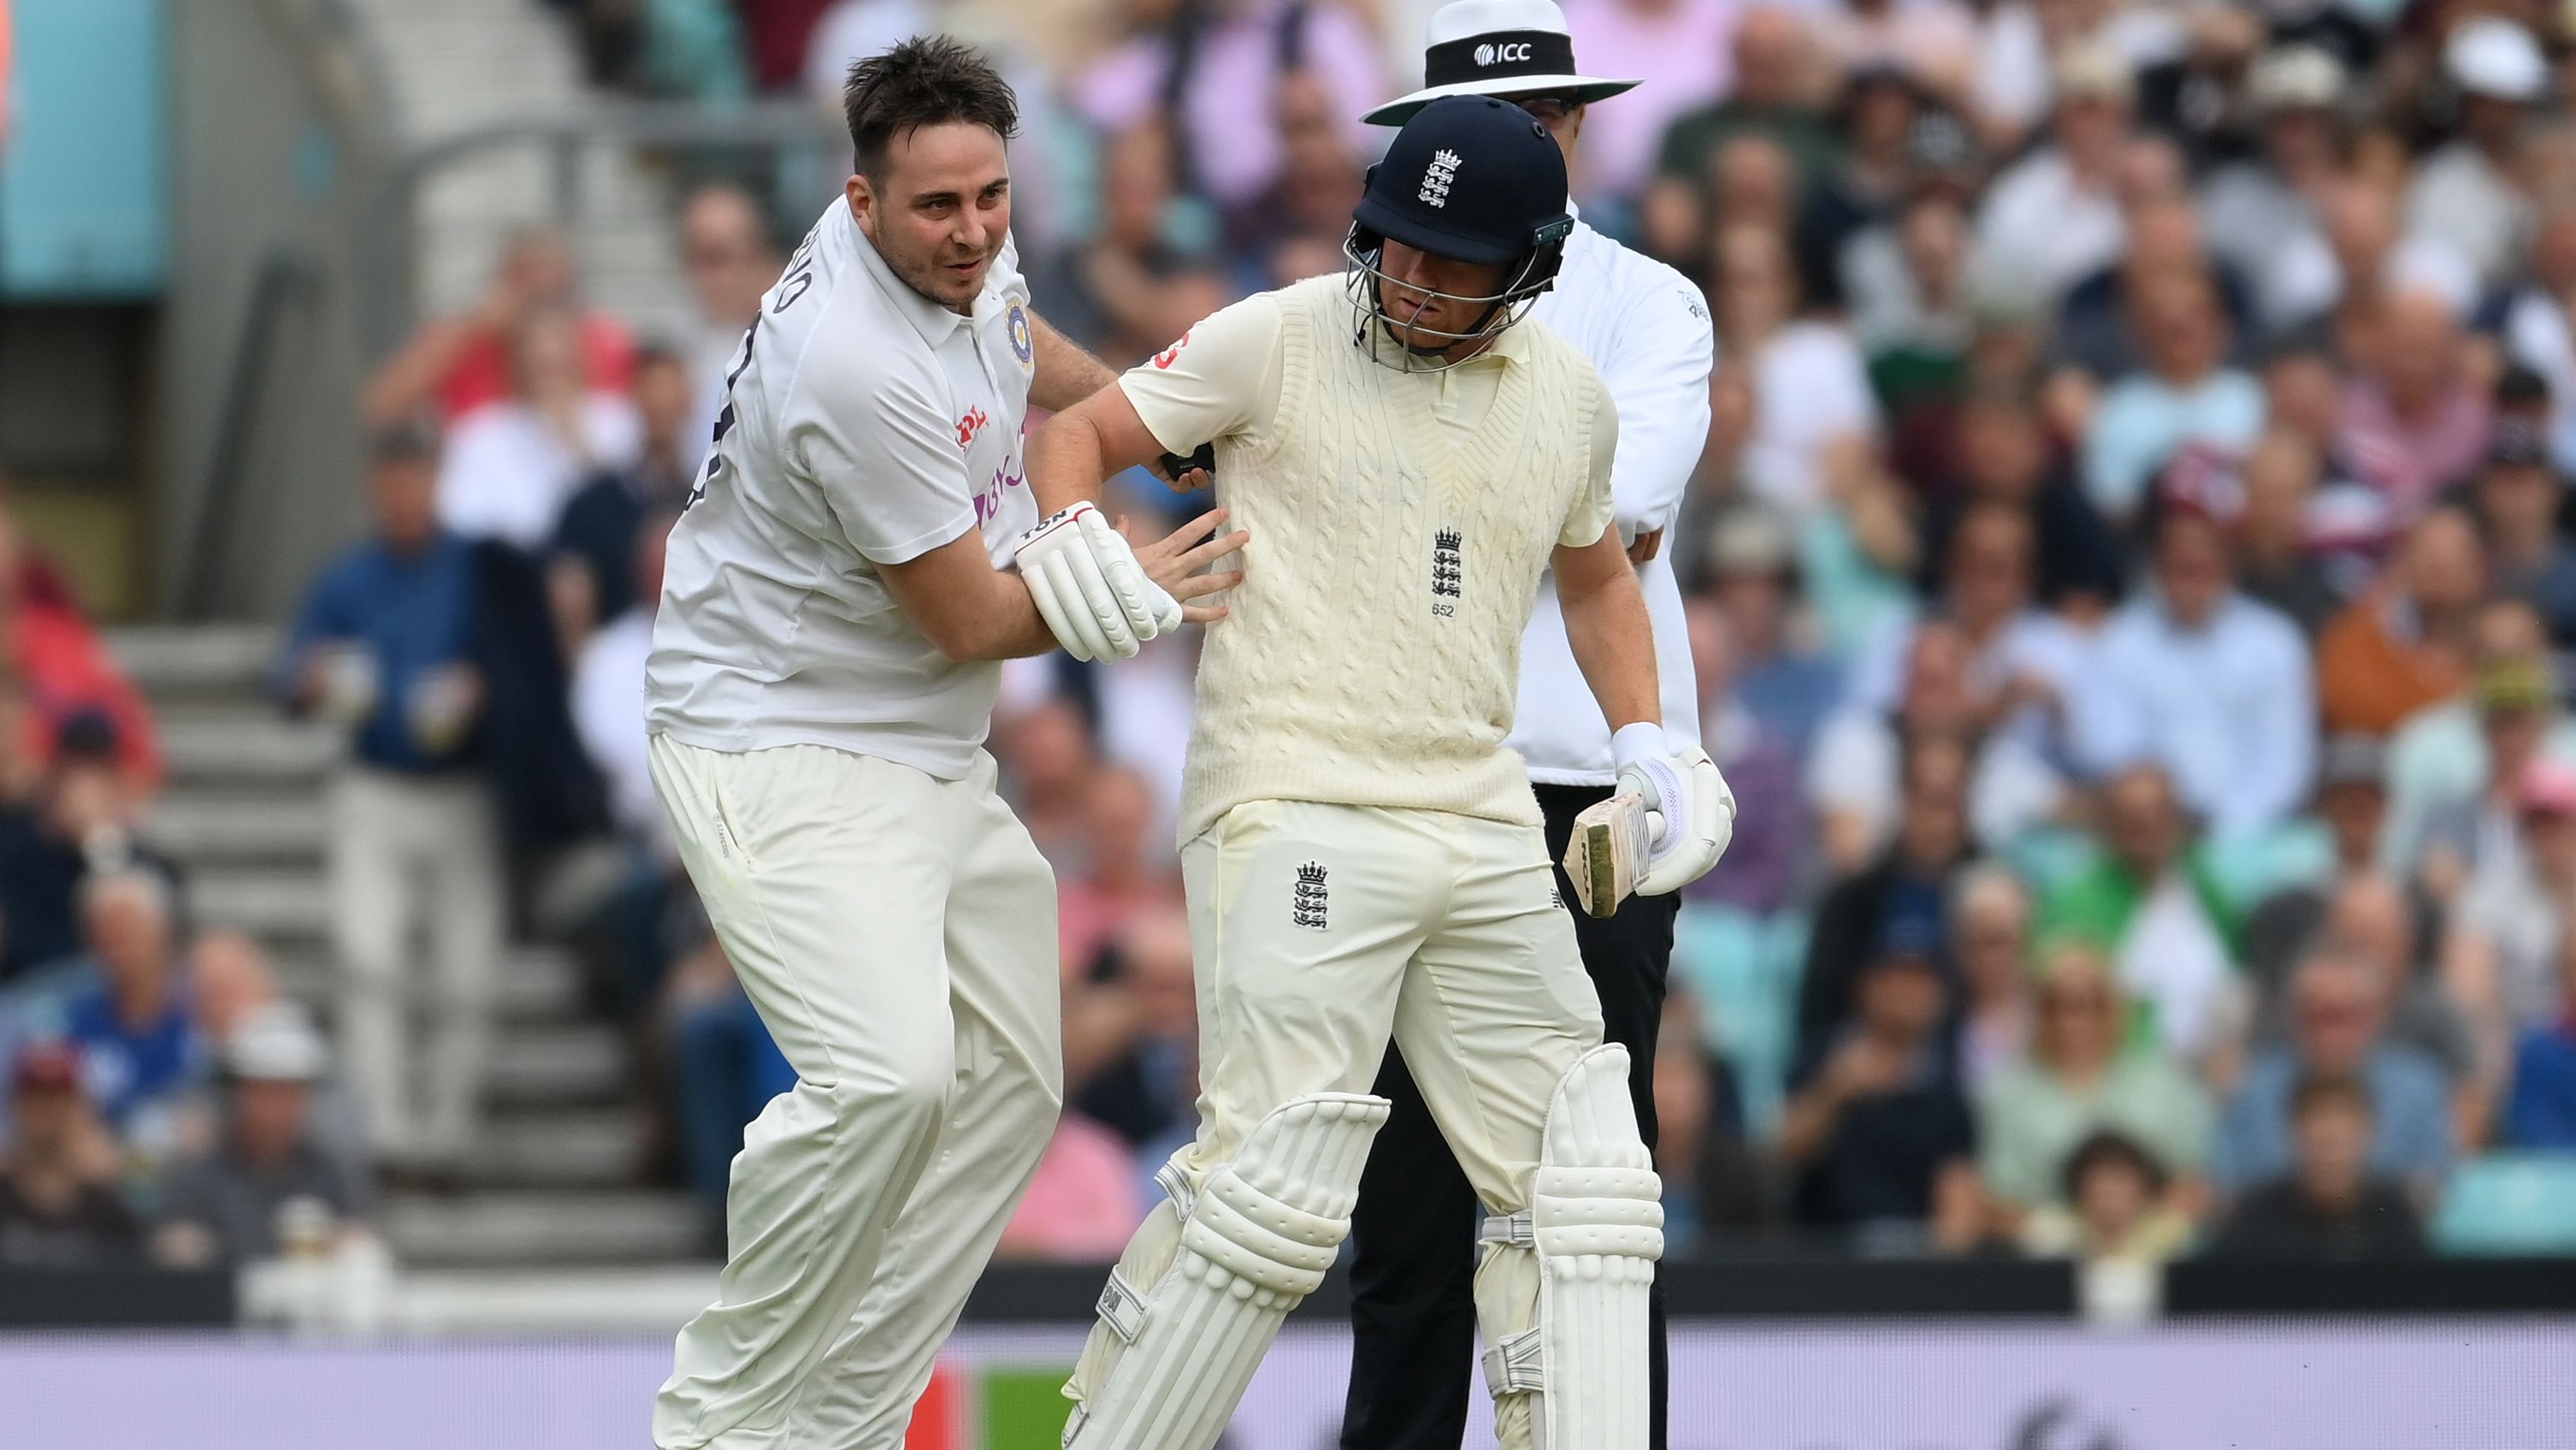 Pitch invader bumps Bairstow in bizarre incident